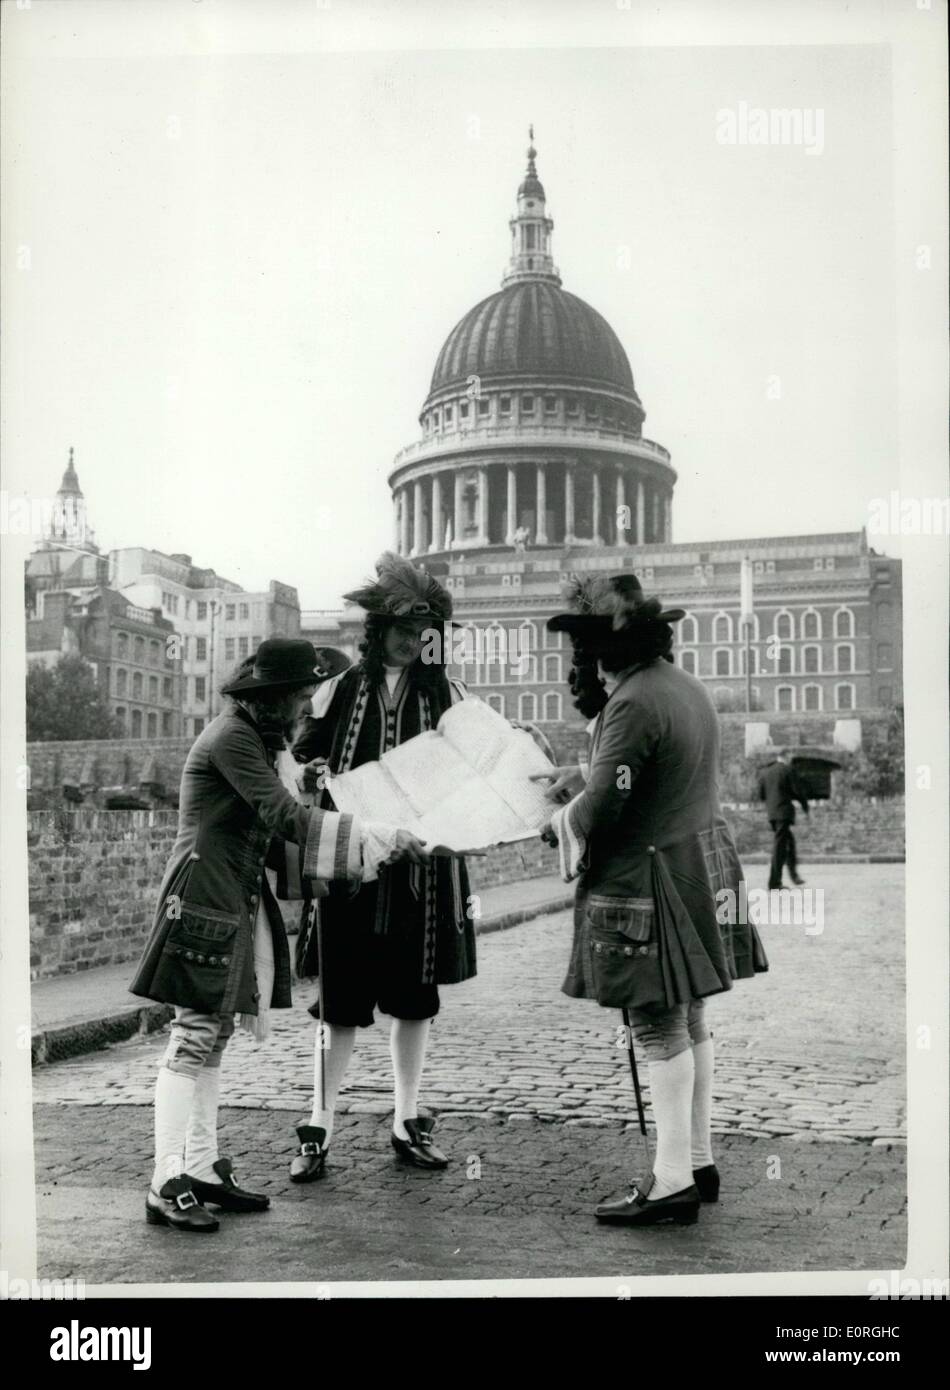 Aug. 08, 1959 - Sir Christopher wren party - 17th century lives again in London.: A 17th century party was organized this evening by members of the Association of Kensington Antiquarians, a group of antique dealers. Members of the Association, dressed in period costume, went to Trig Lane steps, off Upper Thames Street, where Thames lightermen, dressed in Doggetts Coat and Badge regalia, rowed them across to Bankside Stock Photo